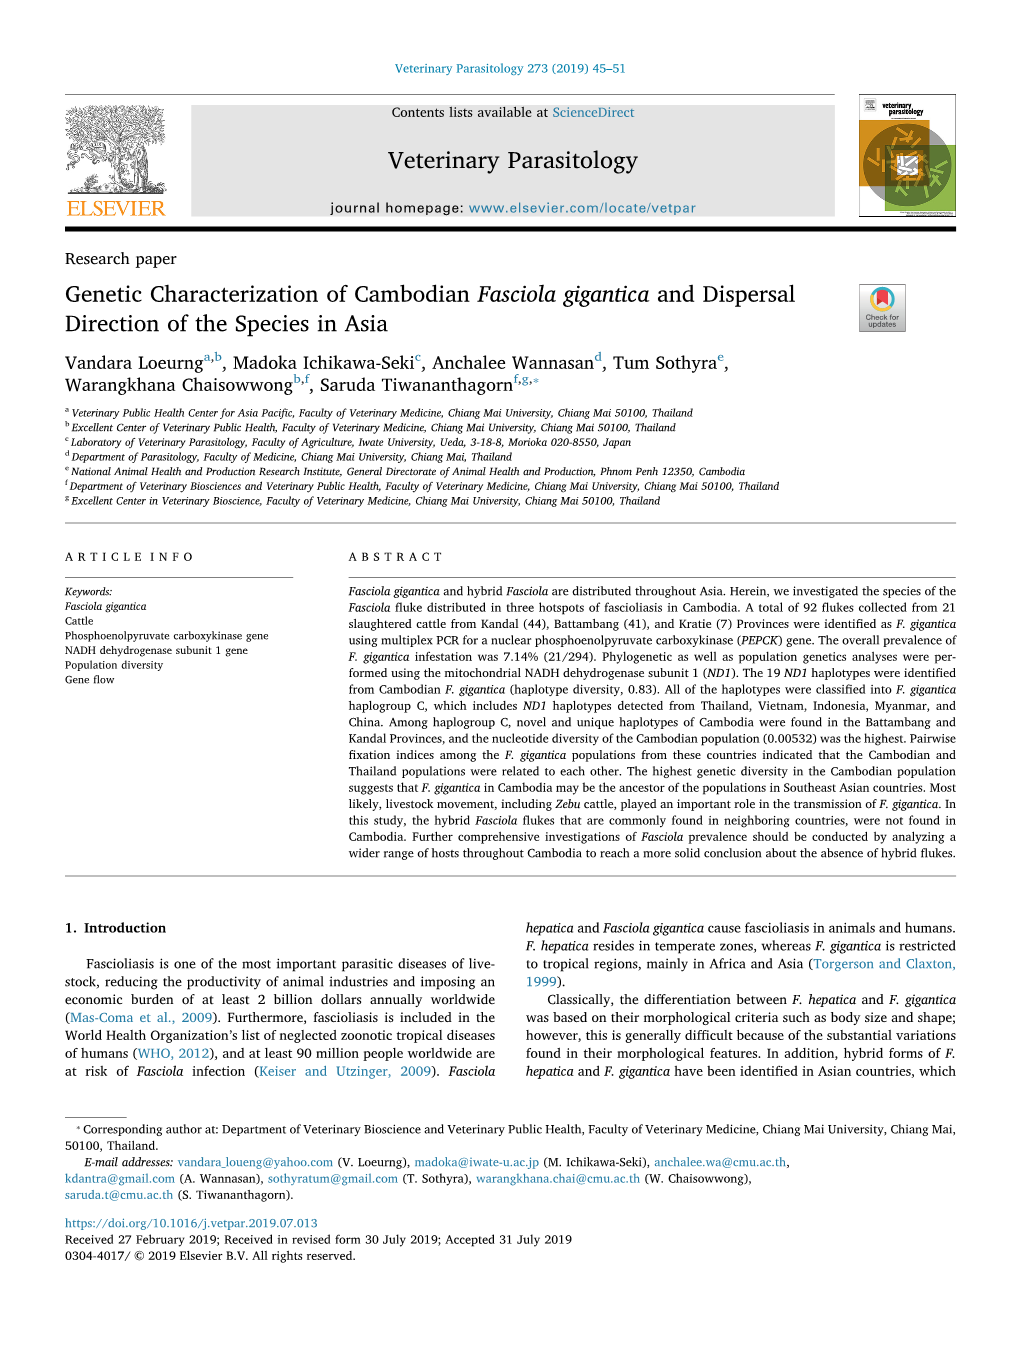 Genetic Characterization of Cambodian Fasciola Gigantica and Dispersal Direction of the Species in Asia T